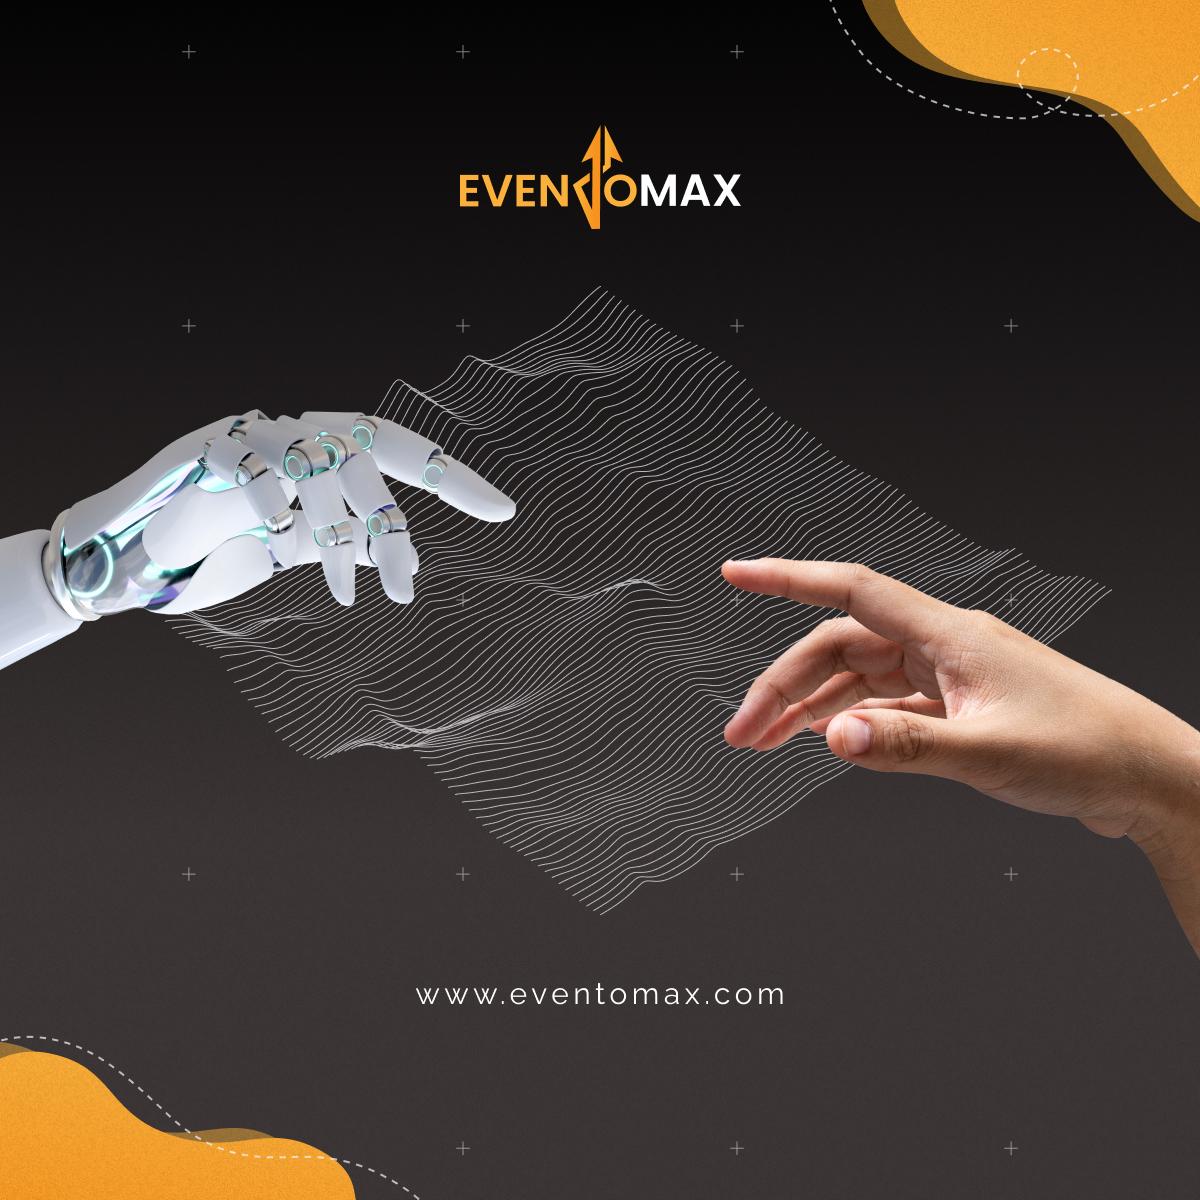 EventoMax: Connecting you to the future